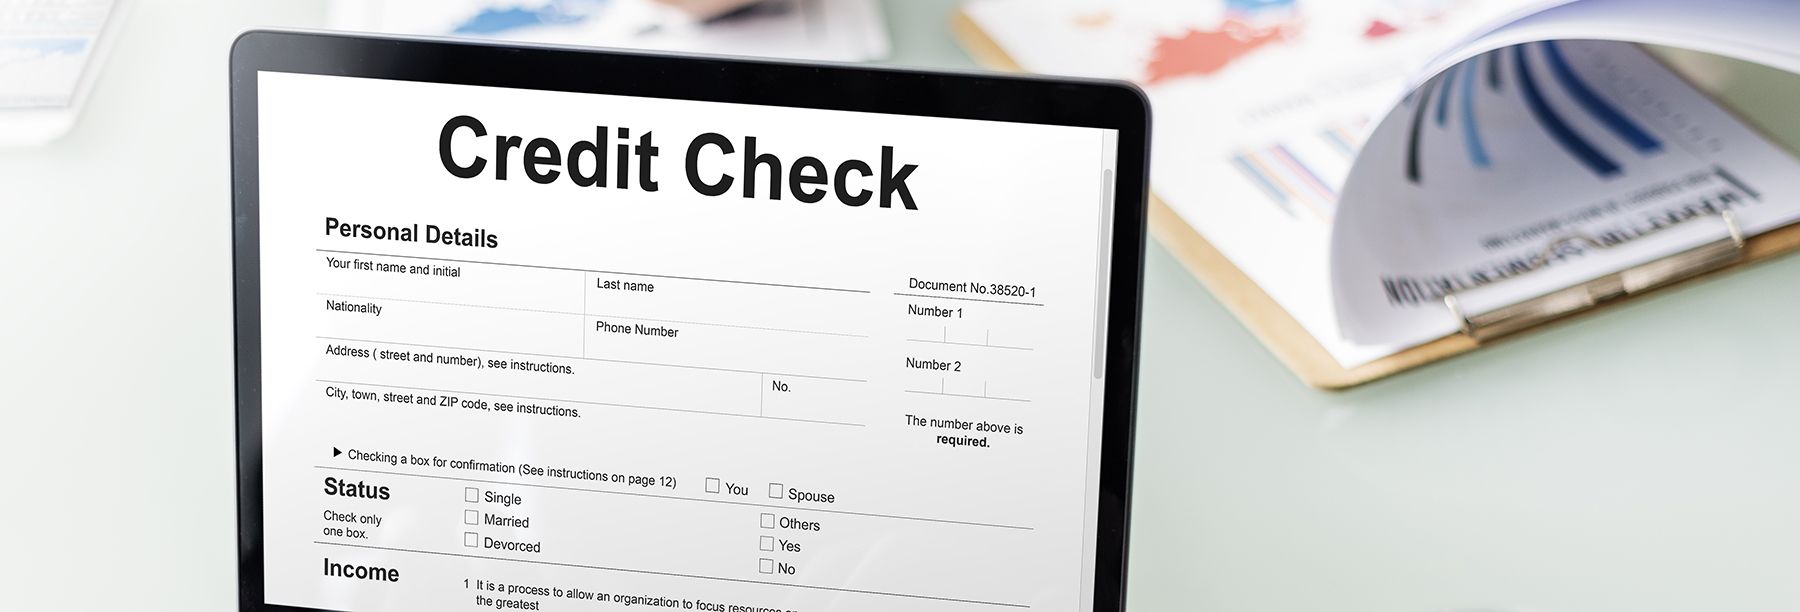 What factors influence your credit score 